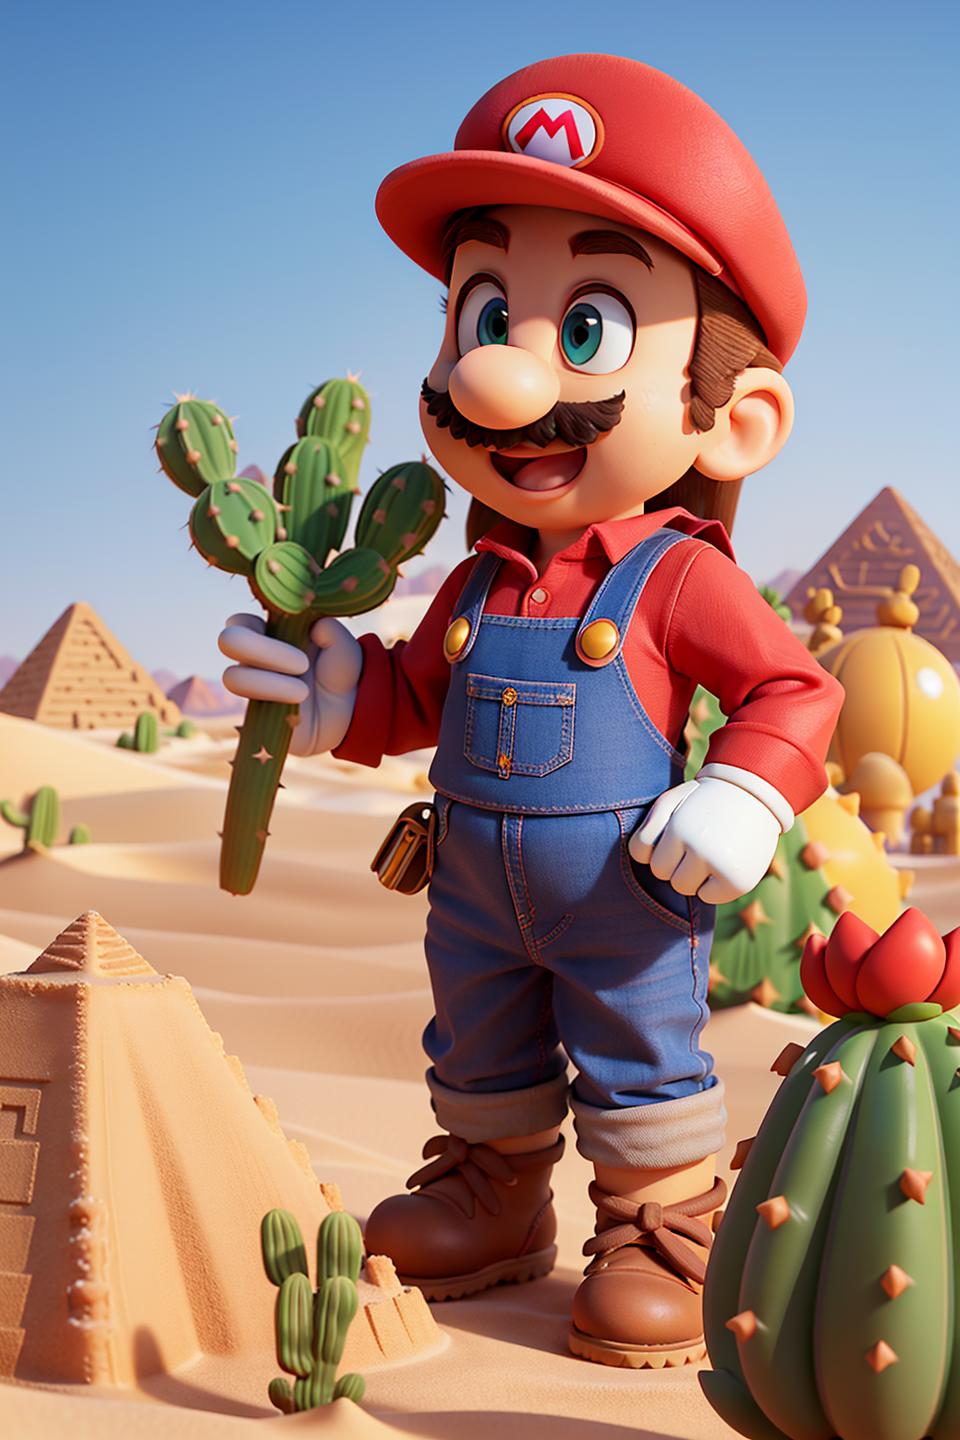 A cartoon character holding a cactus, wearing overalls and a red hat.